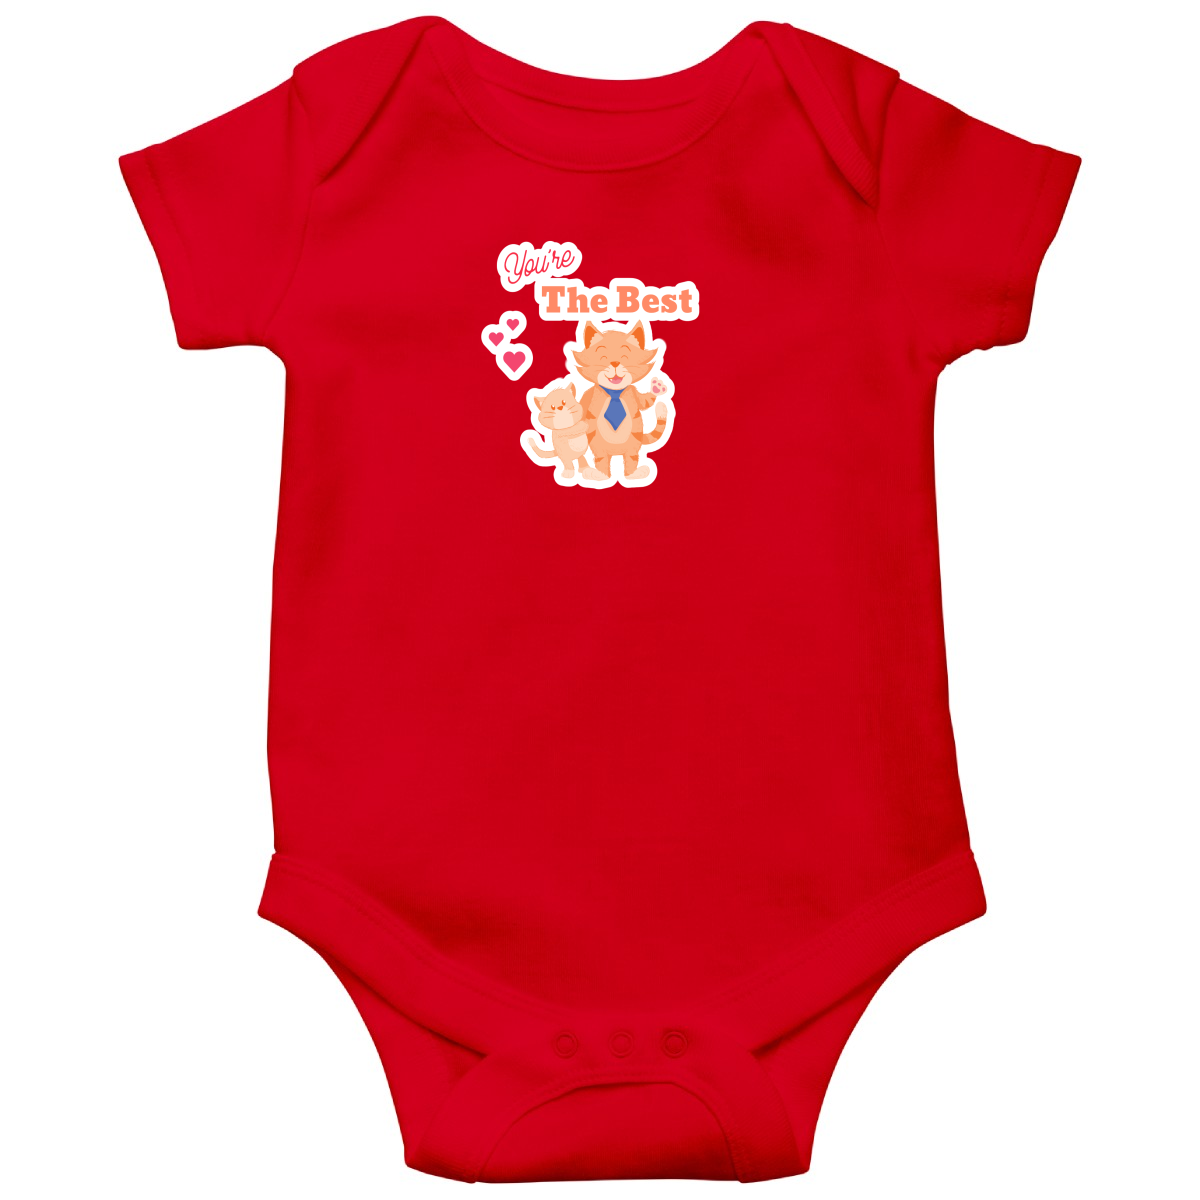 You are the Best Baby Bodysuits | Red